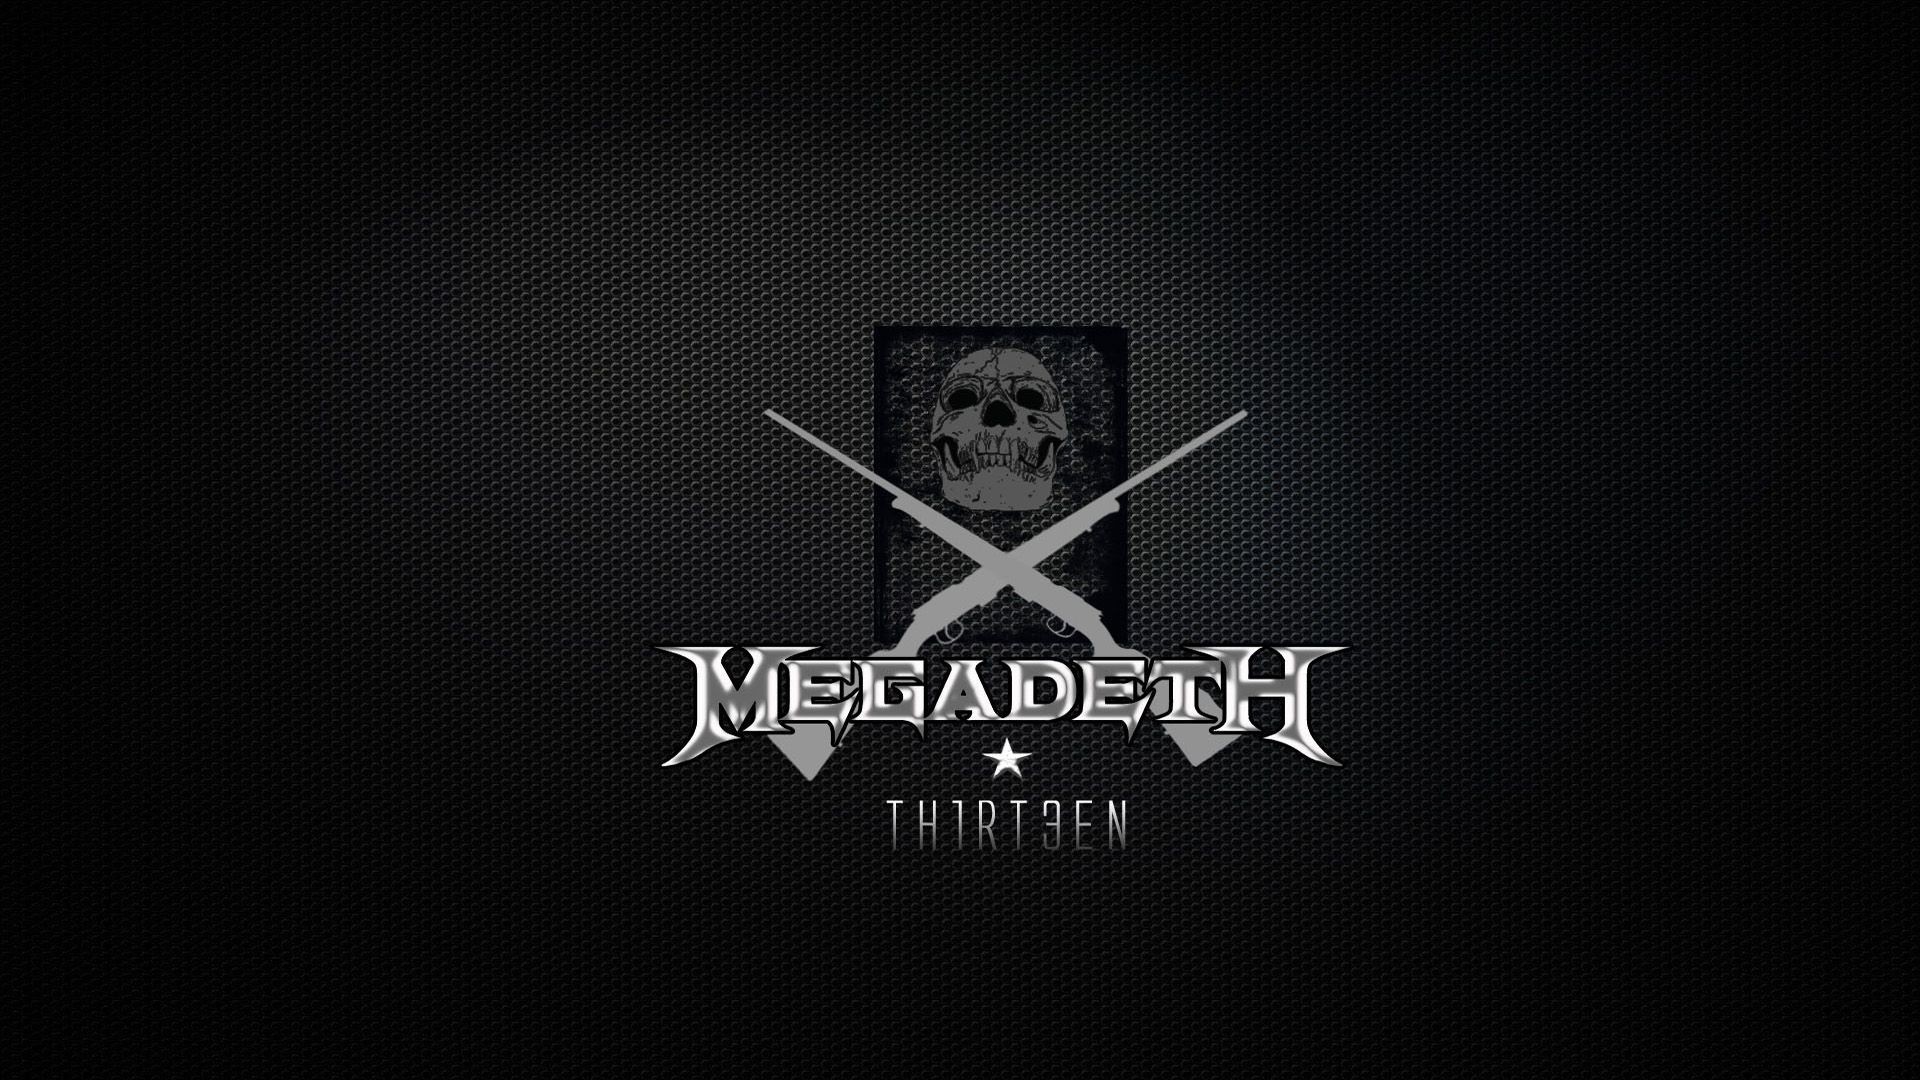 1920x1080 Pictures In High Quality - Megadeth by Dominique Cassell